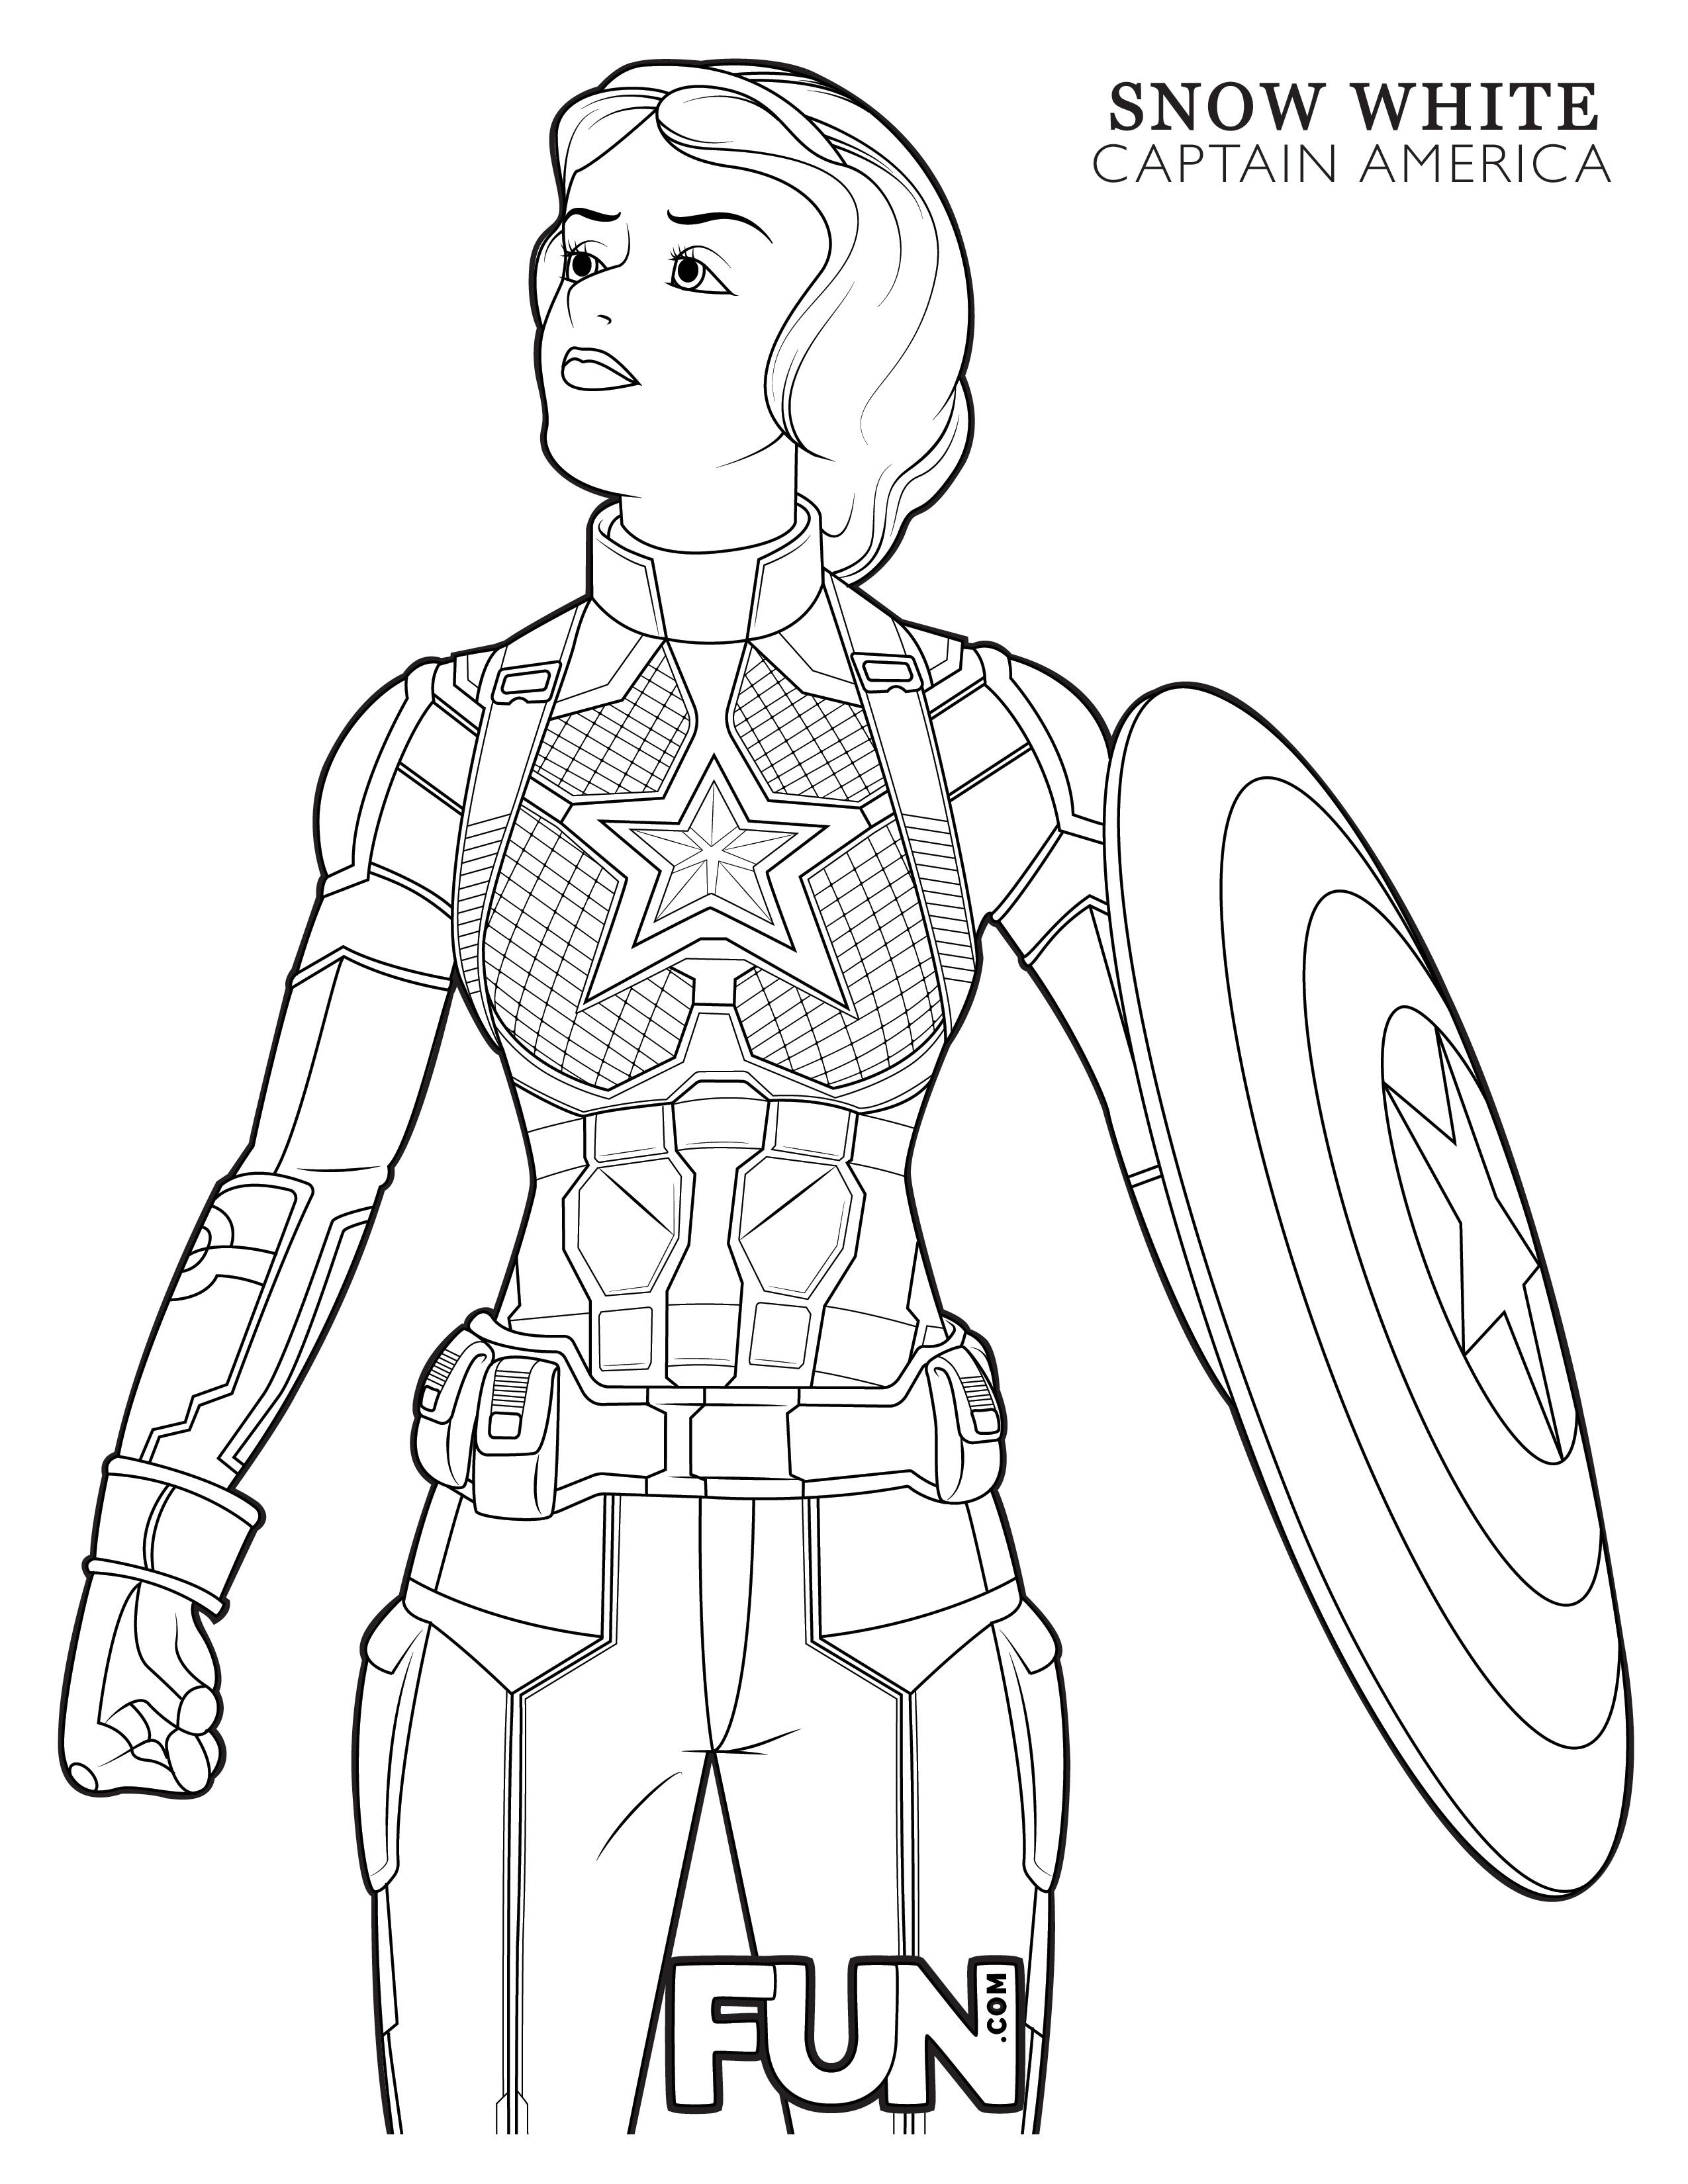 Snow White Captain America Coloring Page